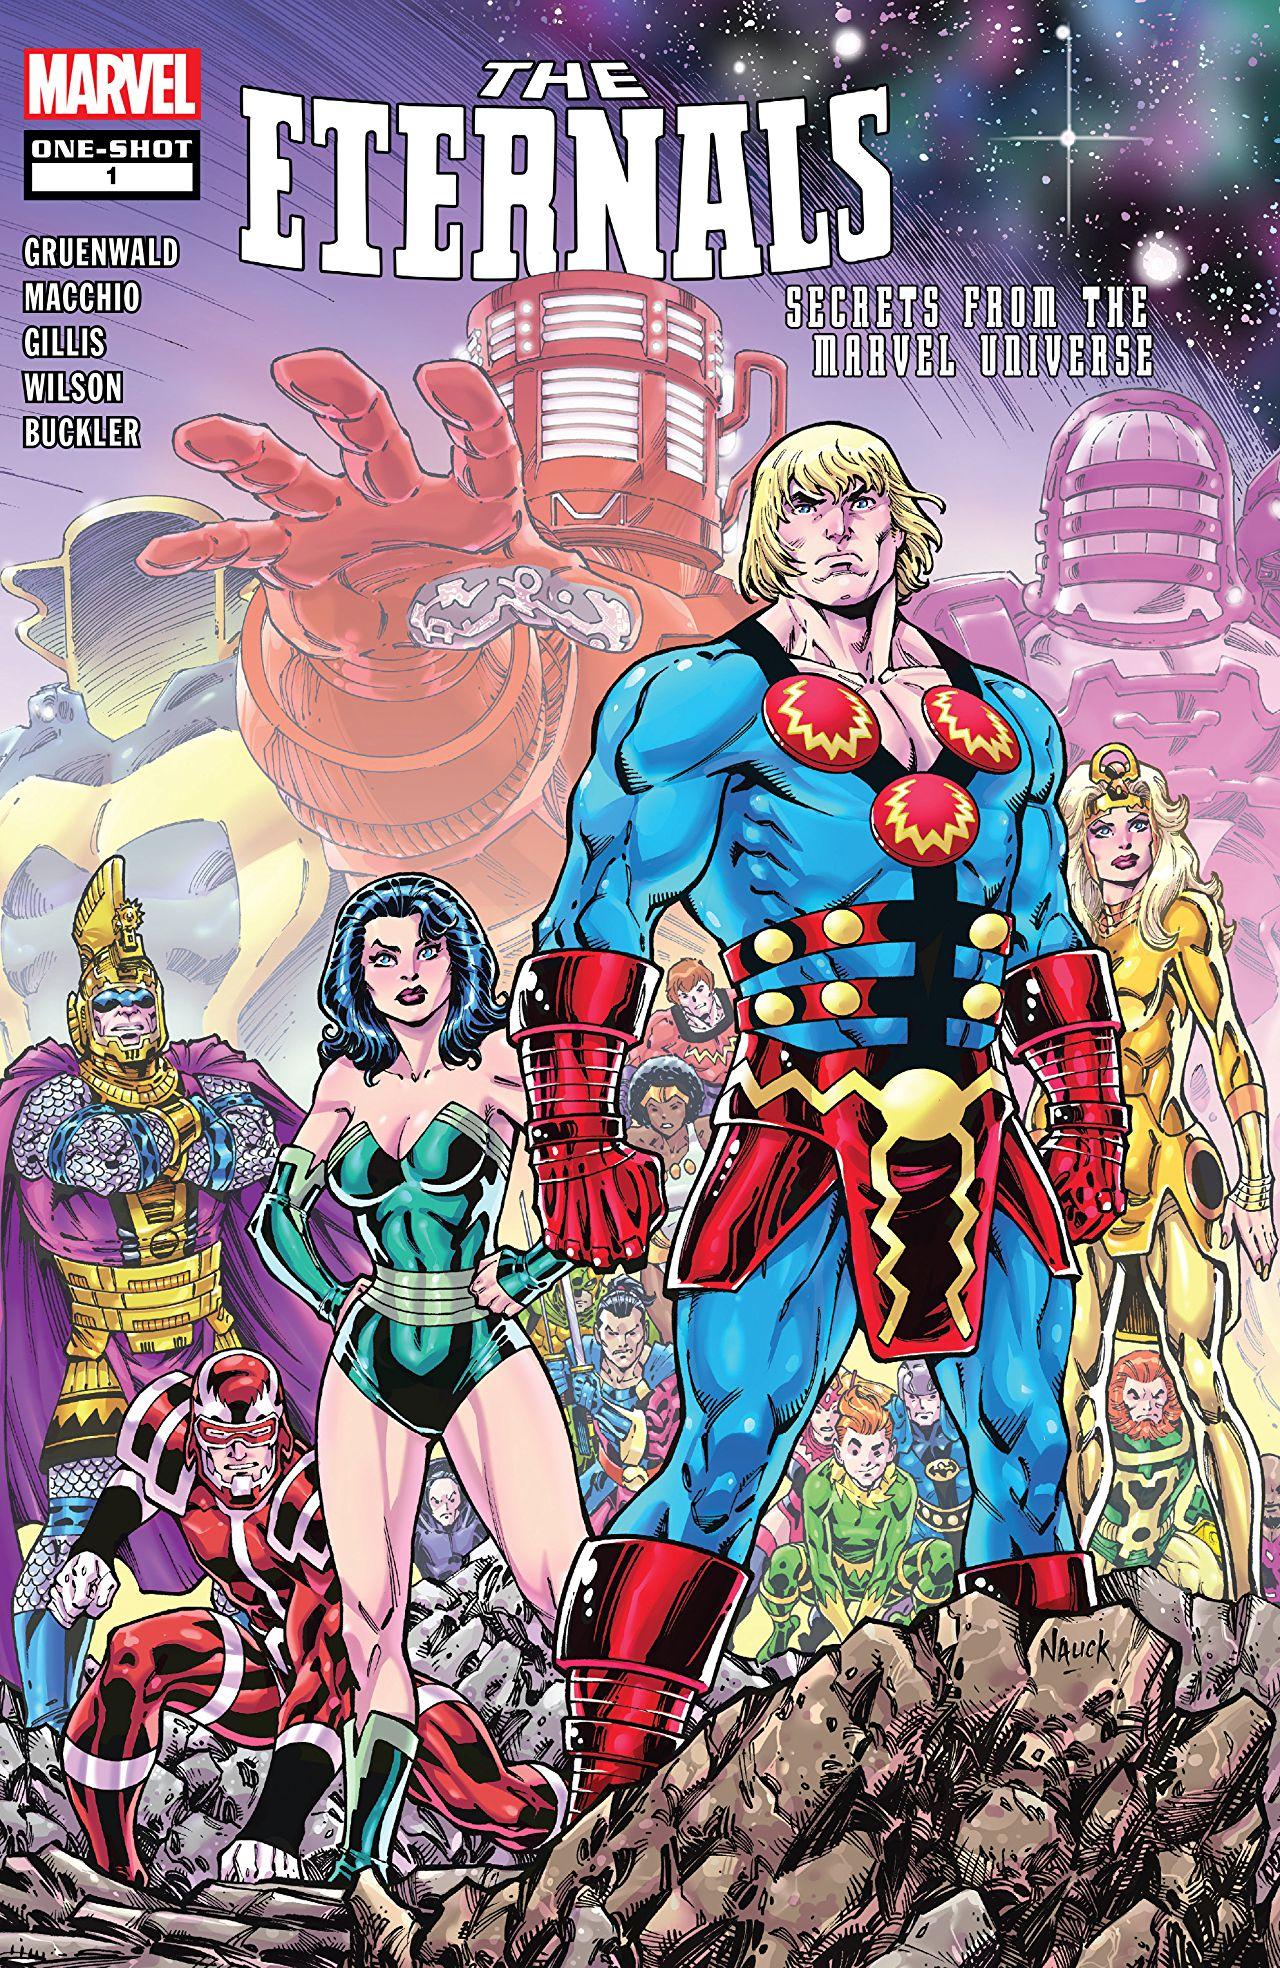 Eternals: Secrets from the Marvel Universe Vol. 1 #1